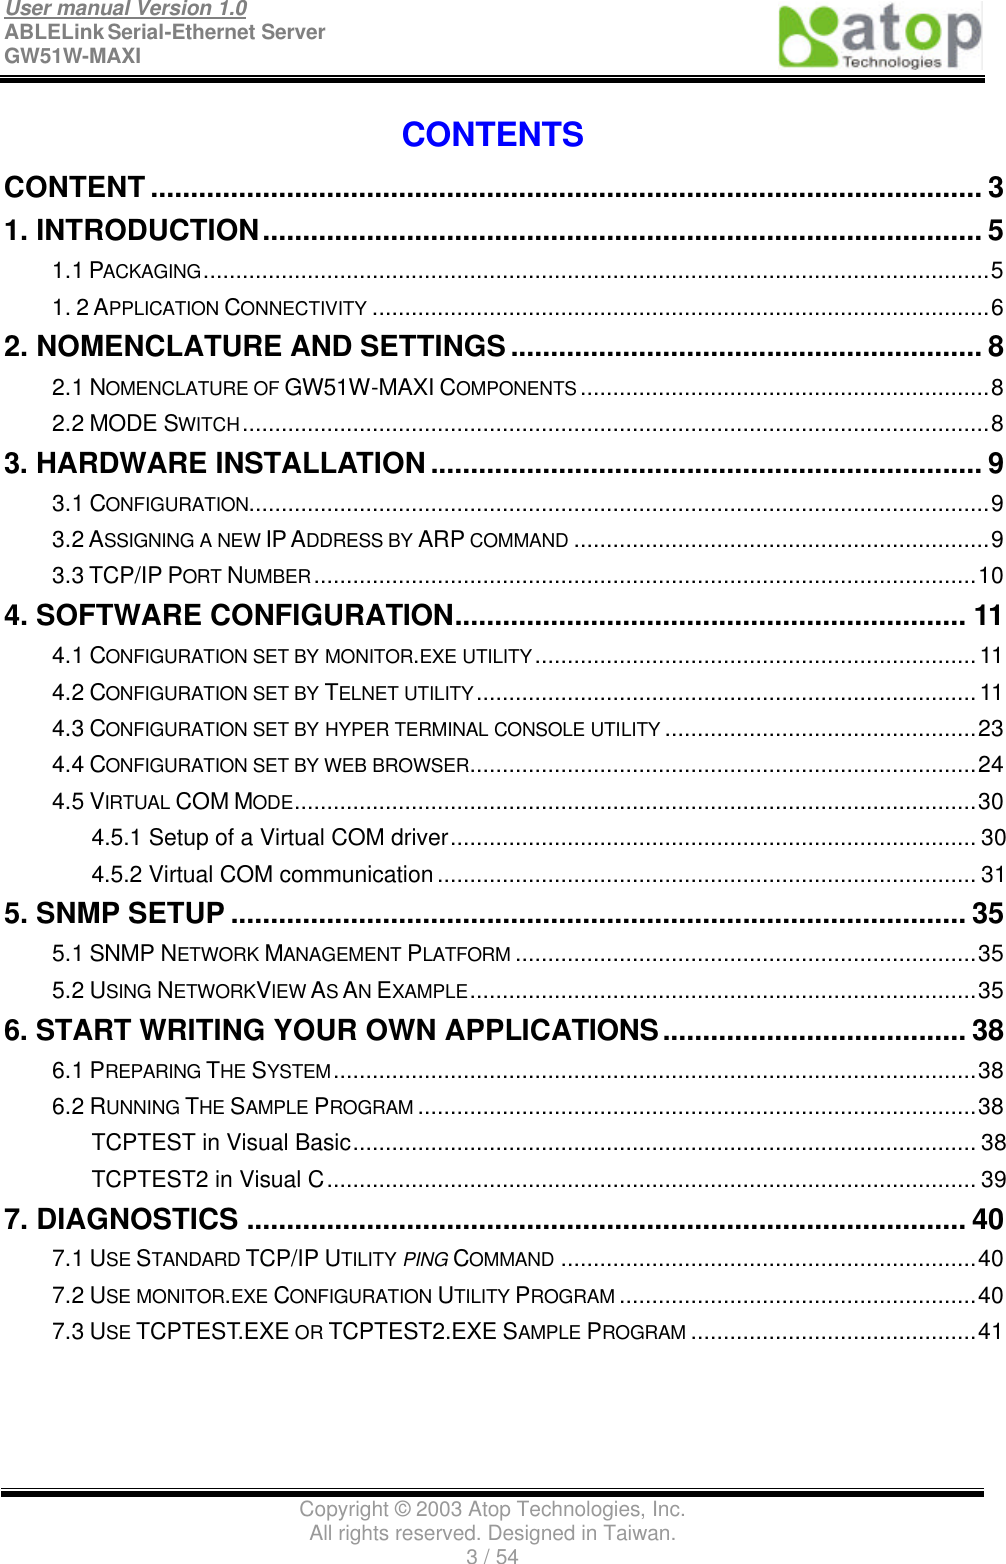 User manual Version 1.0 ABLELink Serial-Ethernet Server   GW51W-MAXI                                                                 Copyright © 2003 Atop Technologies, Inc. All rights reserved. Designed in Taiwan. 3 / 54   CONTENTS CONTENT ........................................................................................................ 3 1. INTRODUCTION.......................................................................................... 5 1.1 PACKAGING.........................................................................................................................5 1. 2 APPLICATION CONNECTIVITY ...............................................................................................6 2. NOMENCLATURE AND SETTINGS........................................................... 8 2.1 NOMENCLATURE OF GW51W-MAXI COMPONENTS ...............................................................8 2.2 MODE SWITCH...................................................................................................................8 3. HARDWARE INSTALLATION..................................................................... 9 3.1 CONFIGURATION..................................................................................................................9 3.2 ASSIGNING A NEW IP ADDRESS BY ARP COMMAND ................................................................9 3.3 TCP/IP PORT NUMBER......................................................................................................10 4. SOFTWARE CONFIGURATION................................................................ 11 4.1 CONFIGURATION SET BY MONITOR.EXE UTILITY....................................................................11 4.2 CONFIGURATION SET BY TELNET UTILITY .............................................................................11 4.3 CONFIGURATION SET BY HYPER TERMINAL CONSOLE UTILITY ................................................23 4.4 CONFIGURATION SET BY WEB BROWSER..............................................................................24 4.5 VIRTUAL COM MODE.........................................................................................................30 4.5.1 Setup of a Virtual COM driver................................................................................. 30 4.5.2 Virtual COM communication................................................................................... 31 5. SNMP SETUP ............................................................................................ 35 5.1 SNMP NETWORK MANAGEMENT PLATFORM .......................................................................35 5.2 USING NETWORKVIEW AS AN EXAMPLE..............................................................................35 6. START WRITING YOUR OWN APPLICATIONS...................................... 38 6.1 PREPARING THE SYSTEM...................................................................................................38 6.2 RUNNING THE SAMPLE PROGRAM ......................................................................................38 TCPTEST in Visual Basic................................................................................................ 38 TCPTEST2 in Visual C.................................................................................................... 39 7. DIAGNOSTICS .......................................................................................... 40 7.1 USE STANDARD TCP/IP UTILITY PING COMMAND ................................................................40 7.2 USE MONITOR.EXE CONFIGURATION UTILITY PROGRAM .......................................................40 7.3 USE TCPTEST.EXE OR TCPTEST2.EXE SAMPLE PROGRAM ............................................41 